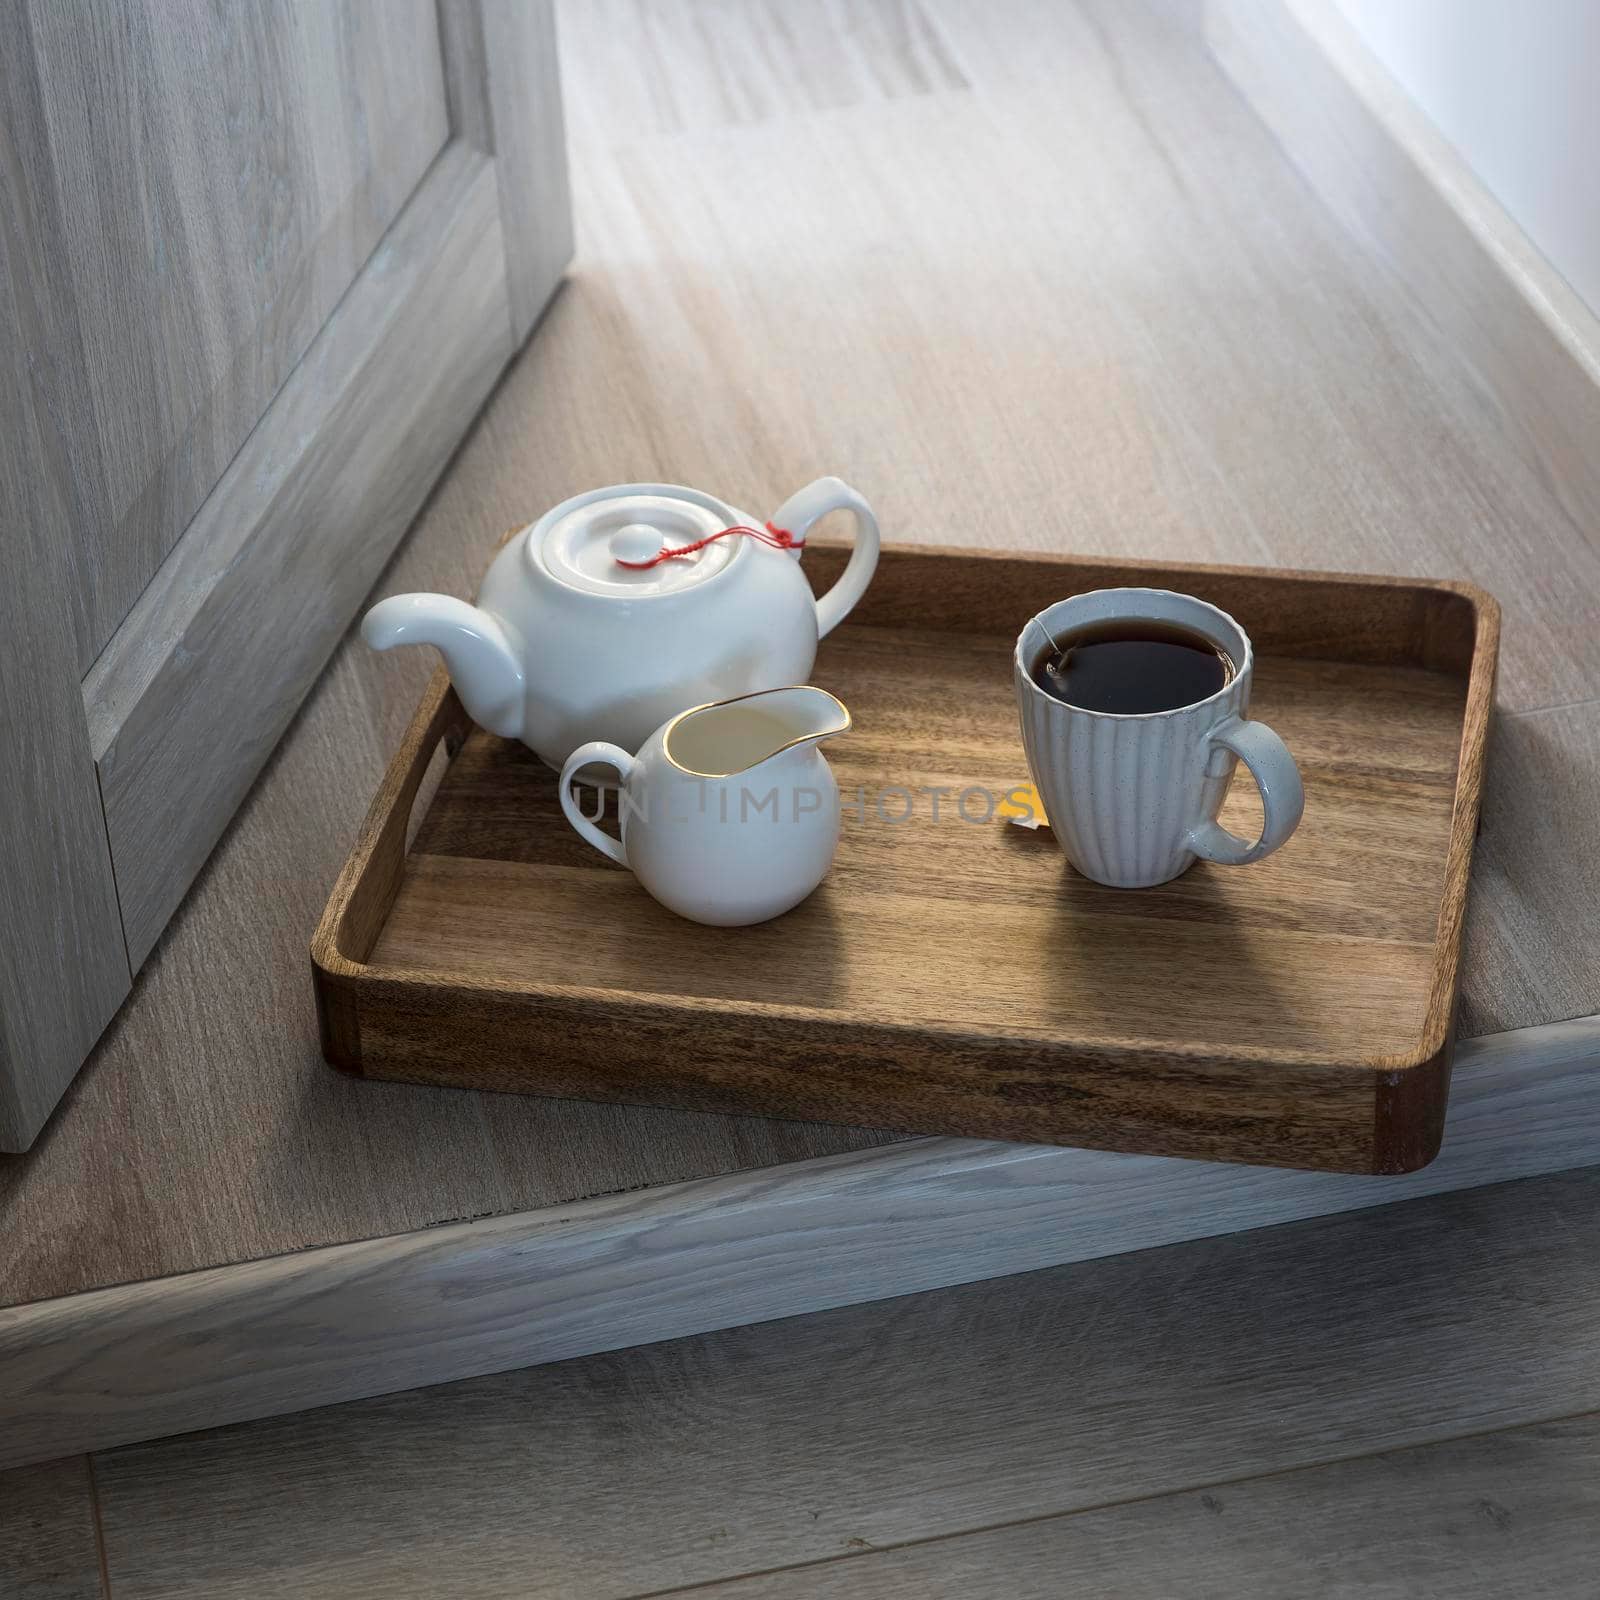 A wooden tray with a cup of tea, a teapot, a milk jug is on the floor in the doorway. by elenarostunova